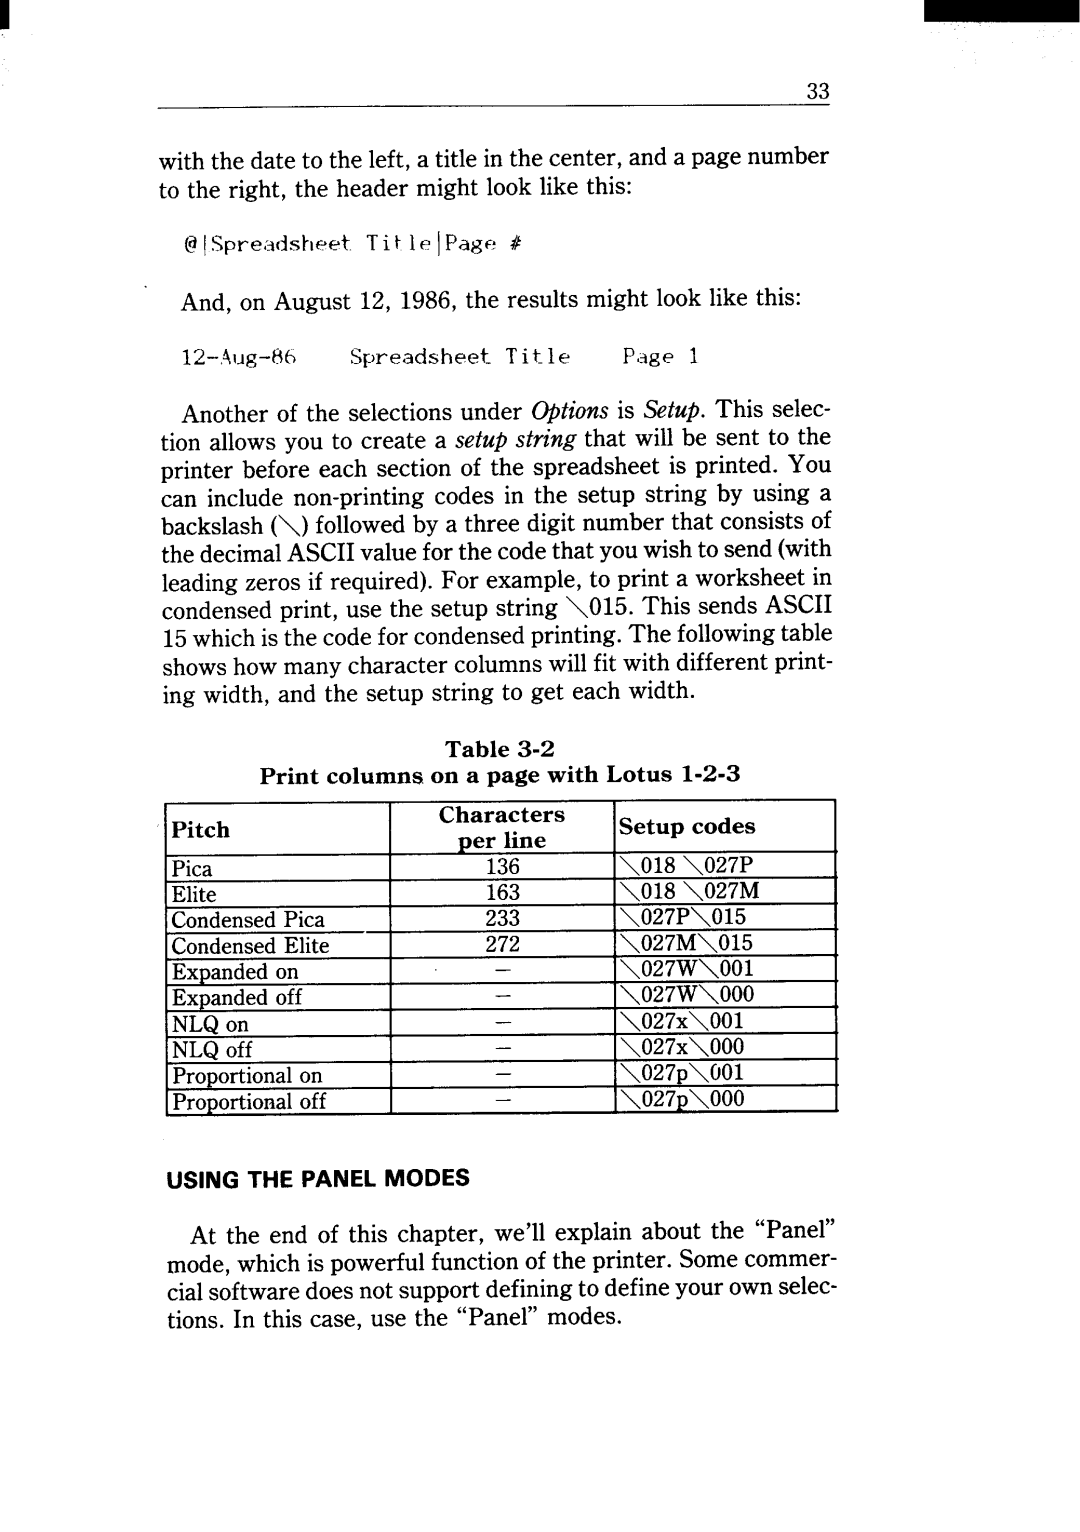 Star Micronics NX-15 user manual And, on August 12, 1986, the results might look like this 